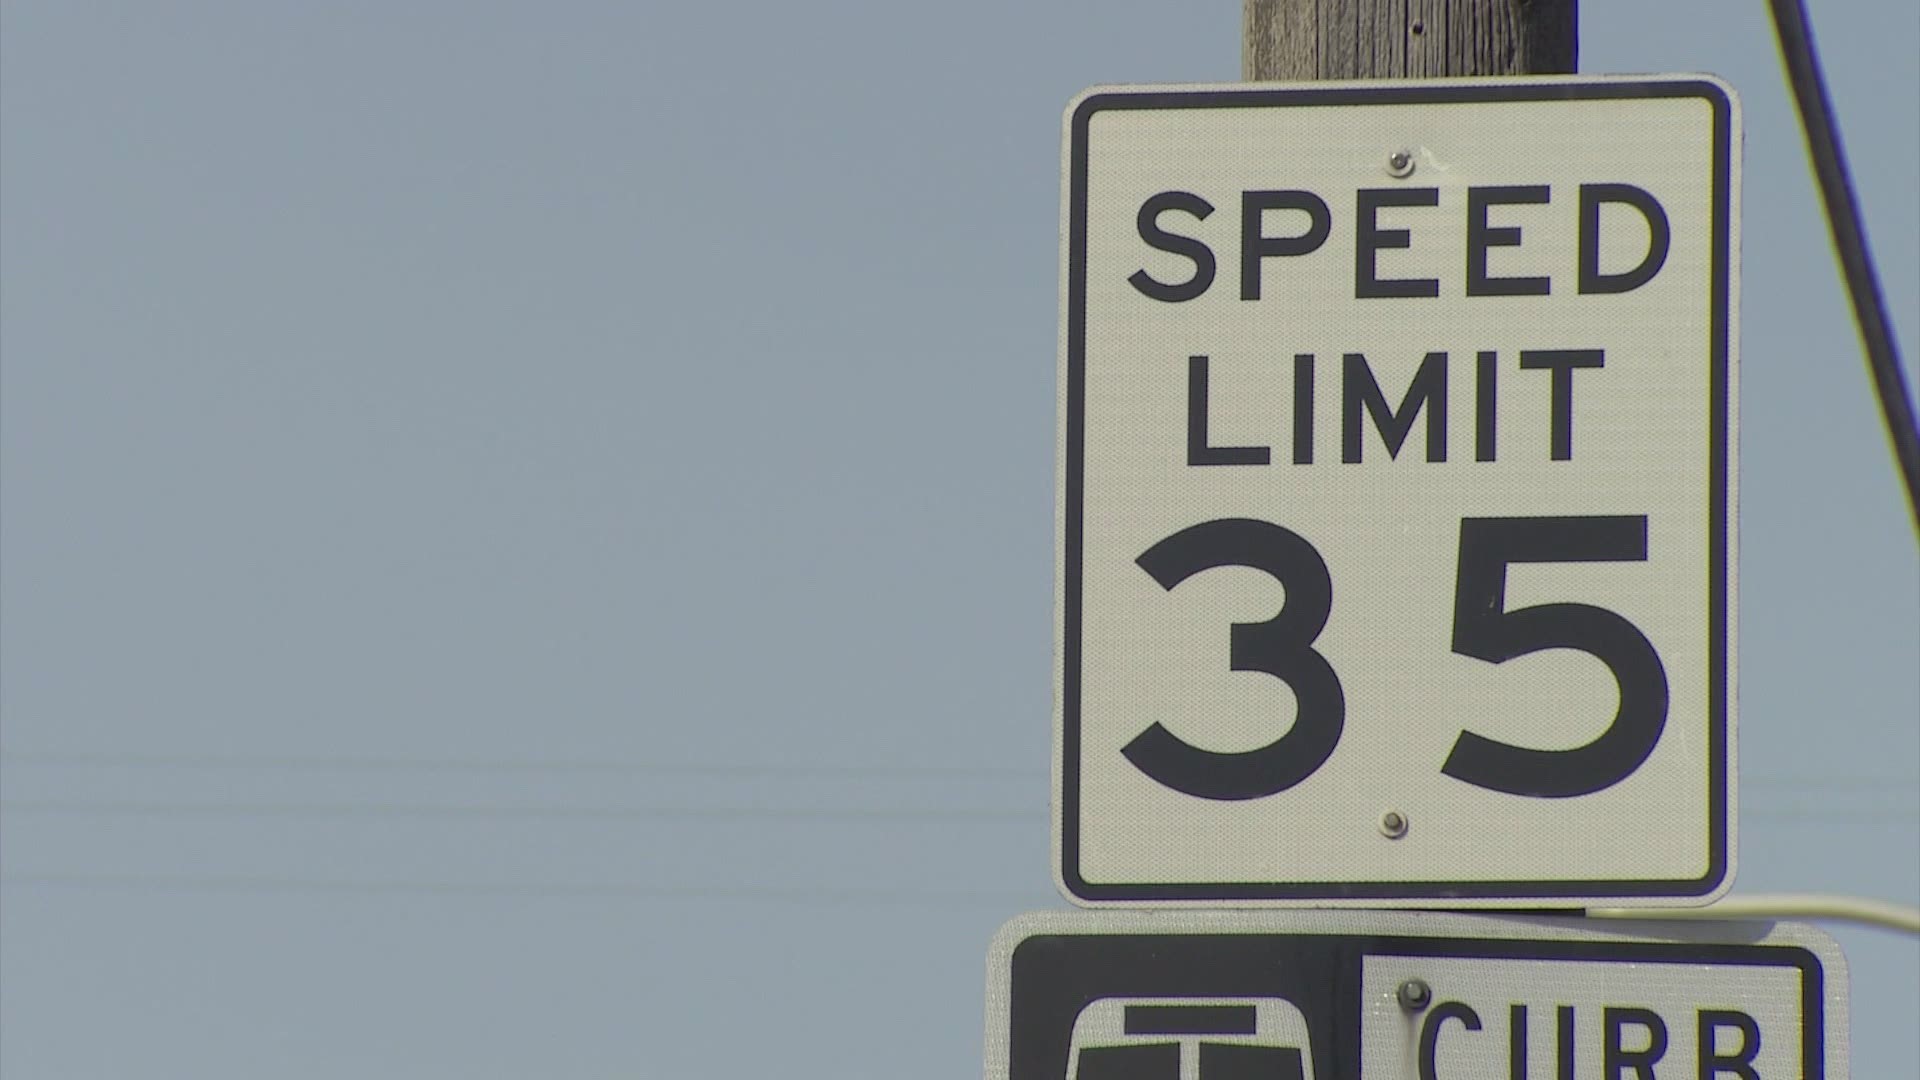 The City of Seattle and WSDOT lowered speed limits on some major streets like Aurora Avenue, Marginal Way and Montlake Boulevard by five miles an hour.